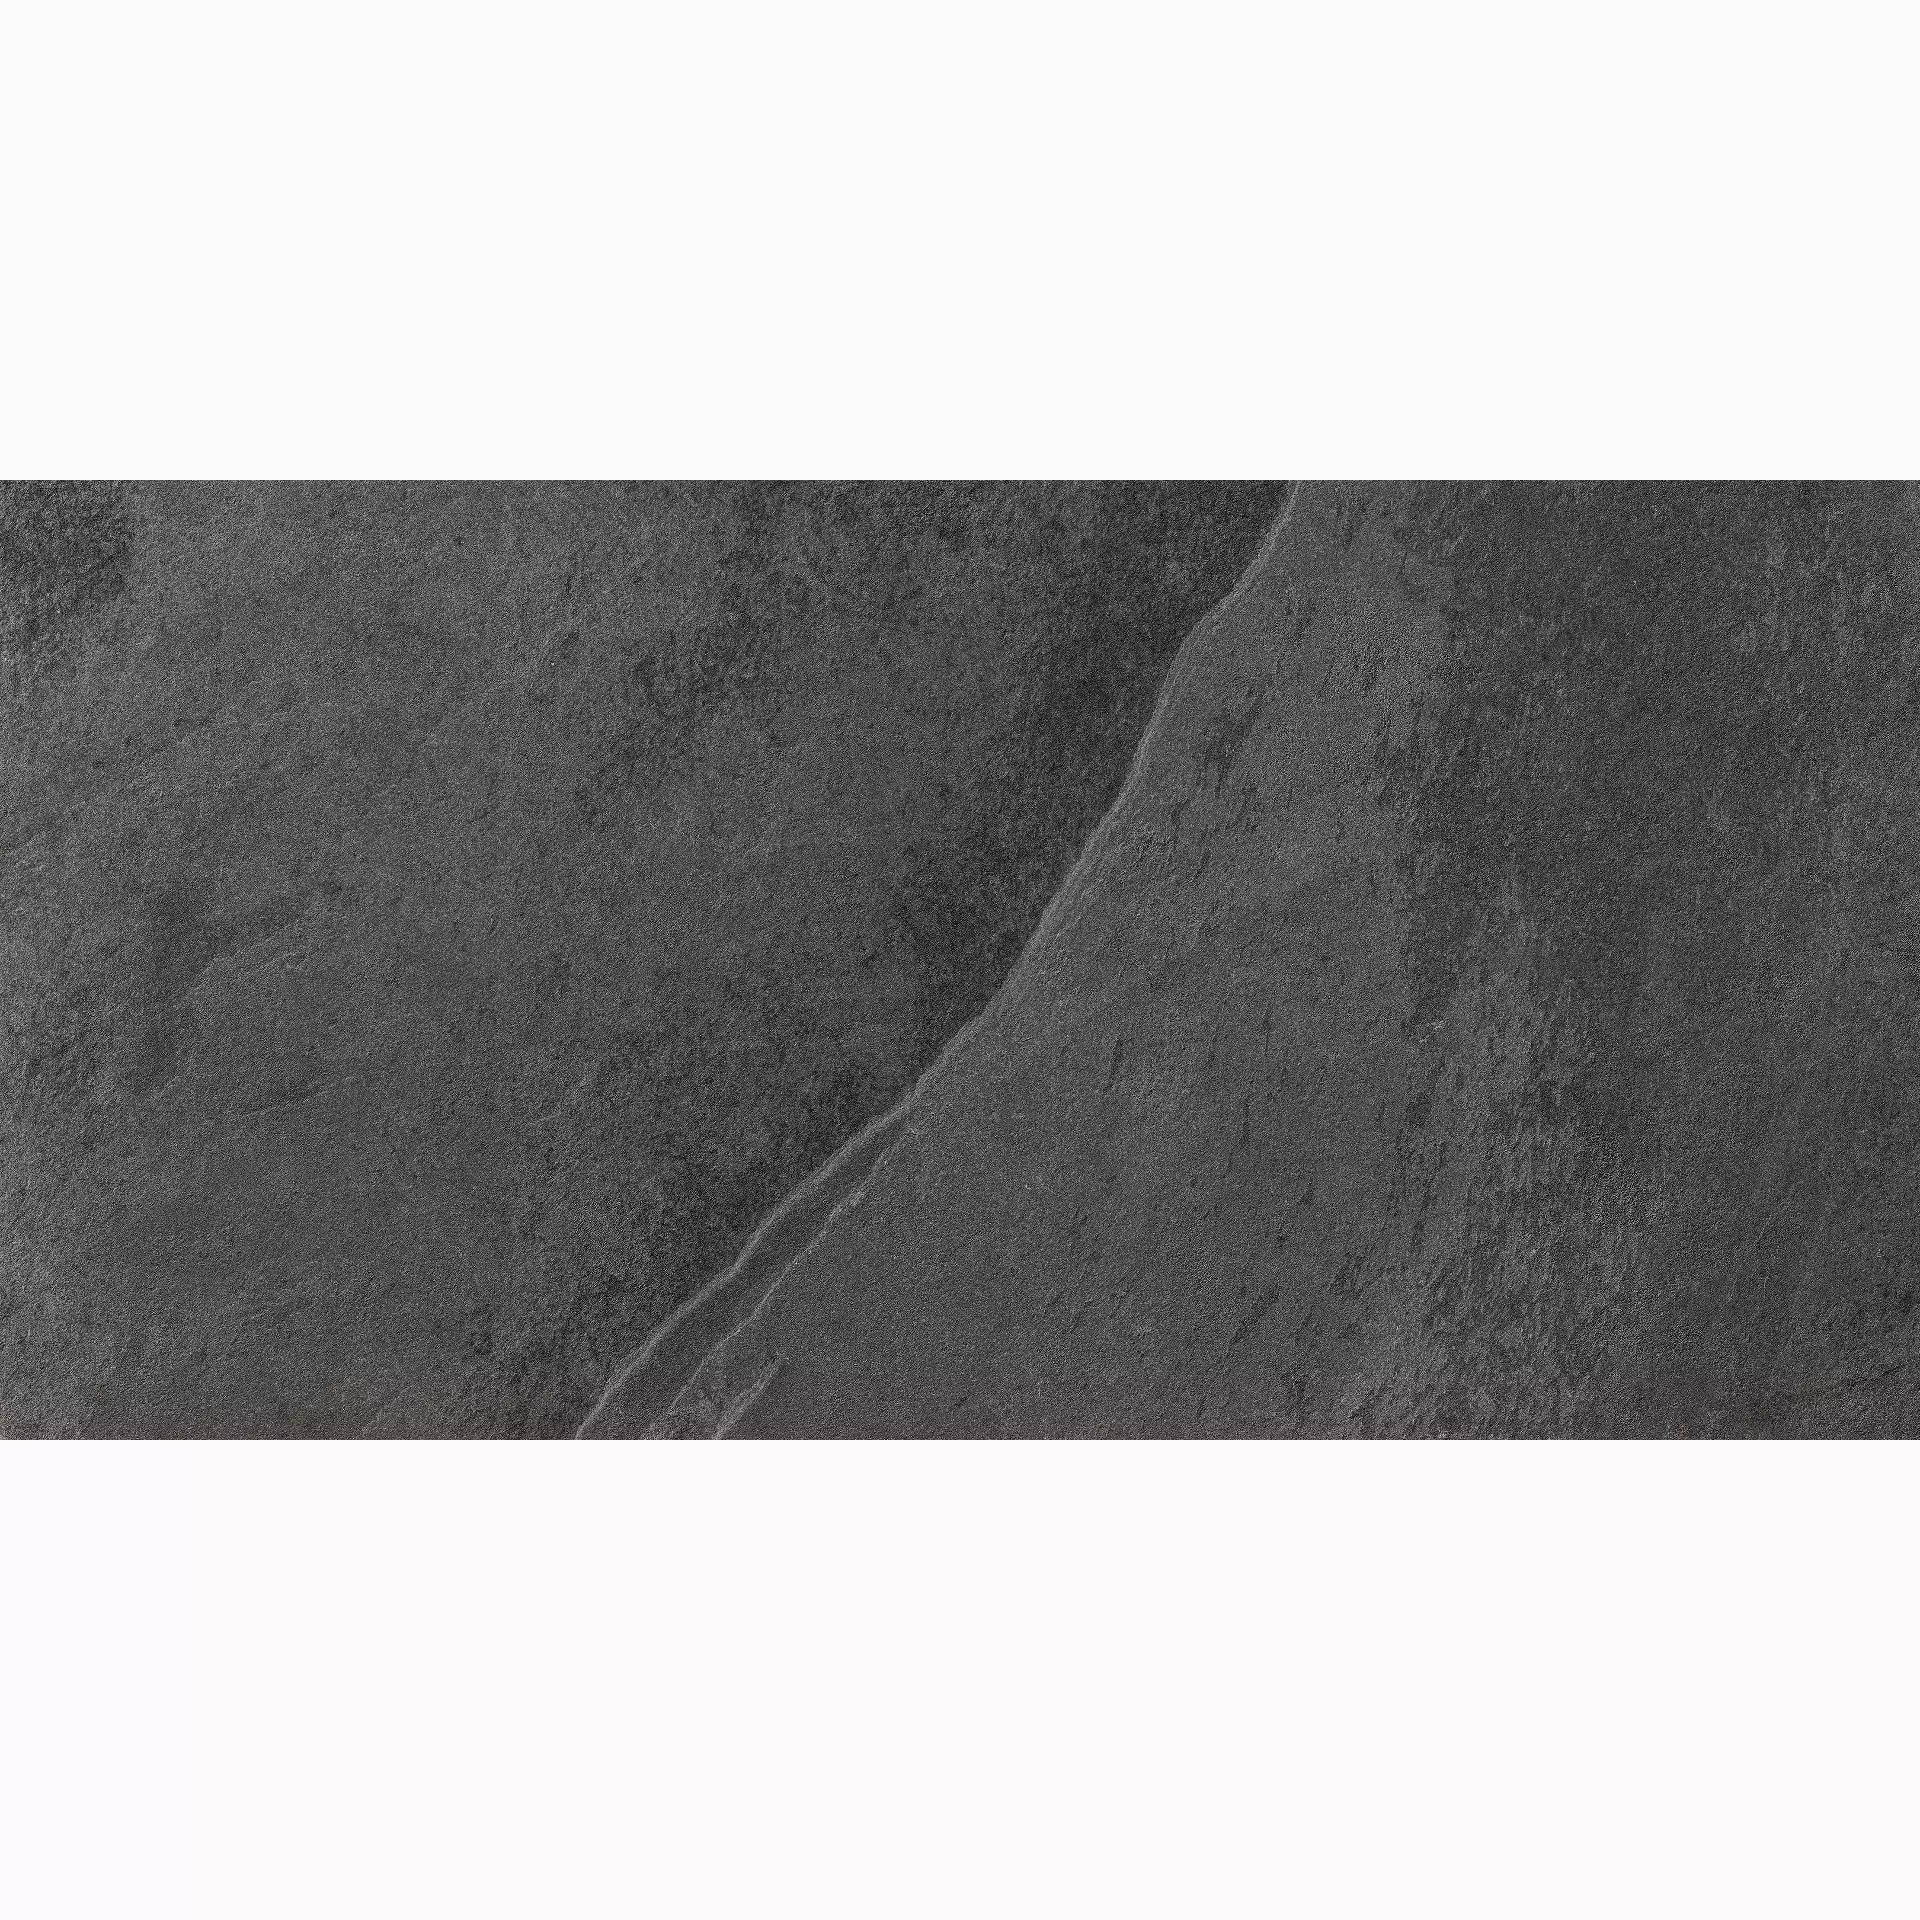 Panaria Frame Groove Naturale FGXFMR1 60x120cm rectified 9mm